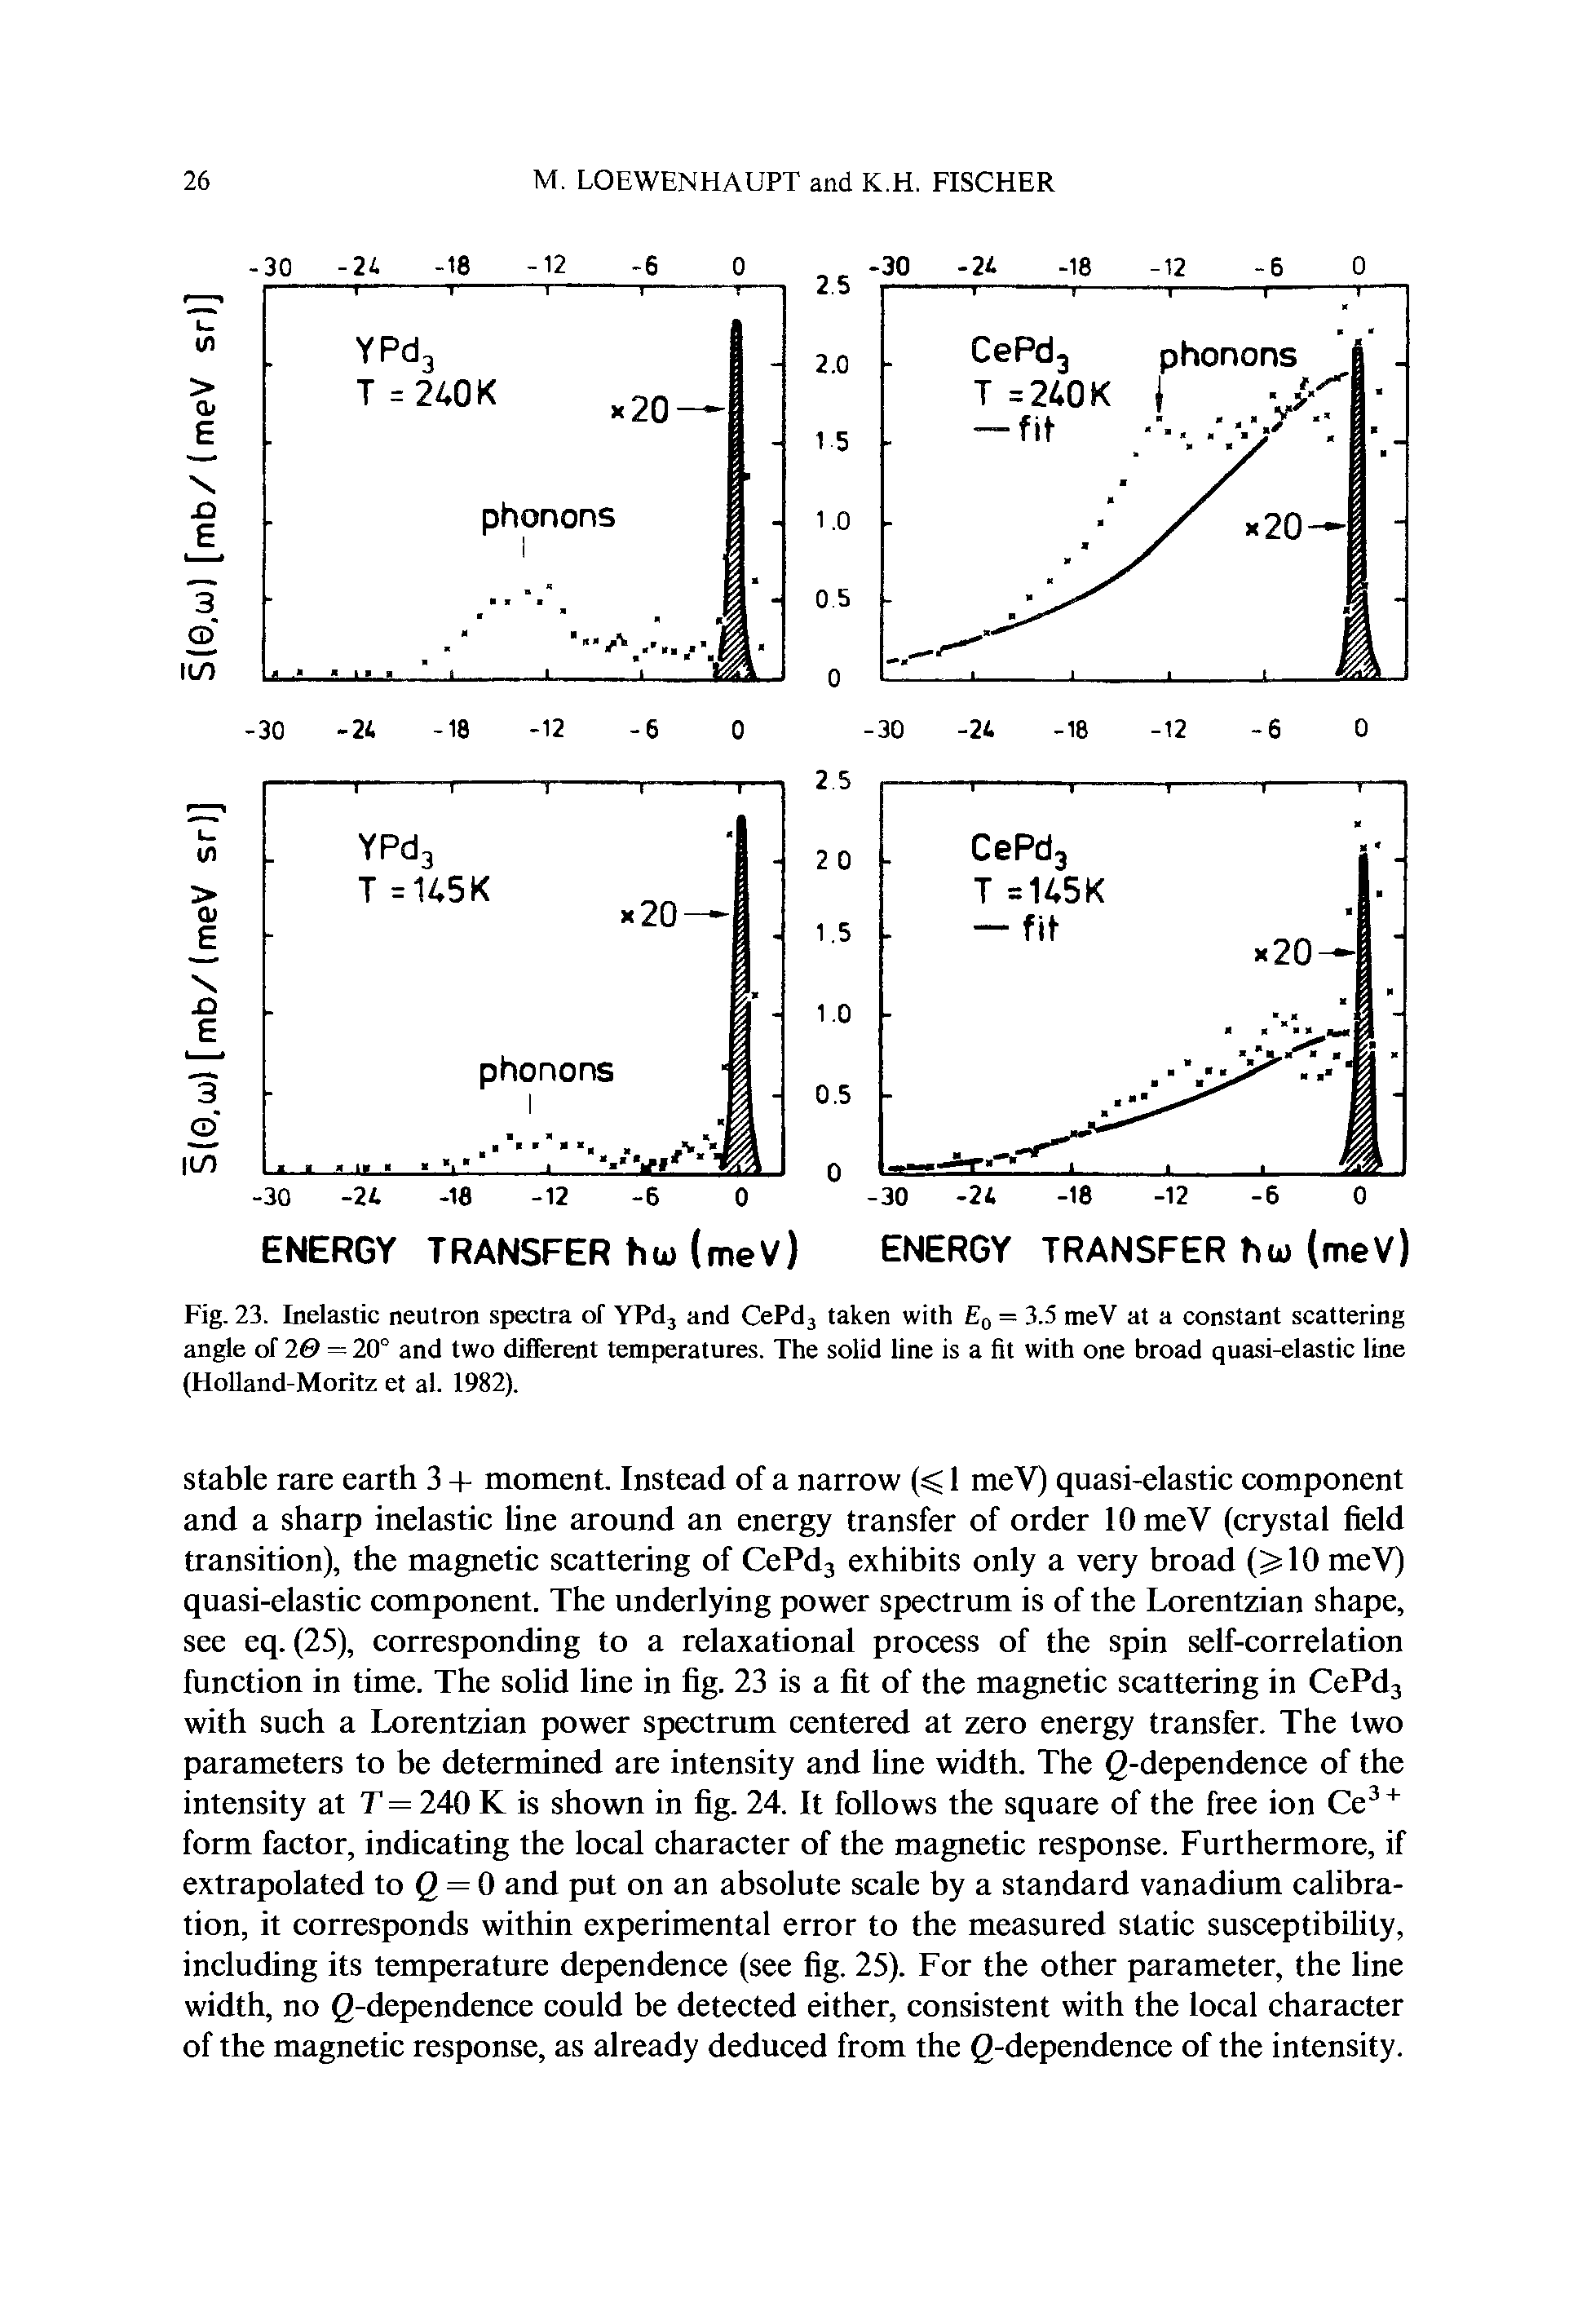 Fig. 23. Inelastic neutron spectra of YPdj and CePdj taken with q = 3.5 meV at a constant scattering angle of 20 = 20° and two different temperatures. The solid line is a fit with one broad quasi-elastic line (Holland-Moritz et al. 1982).